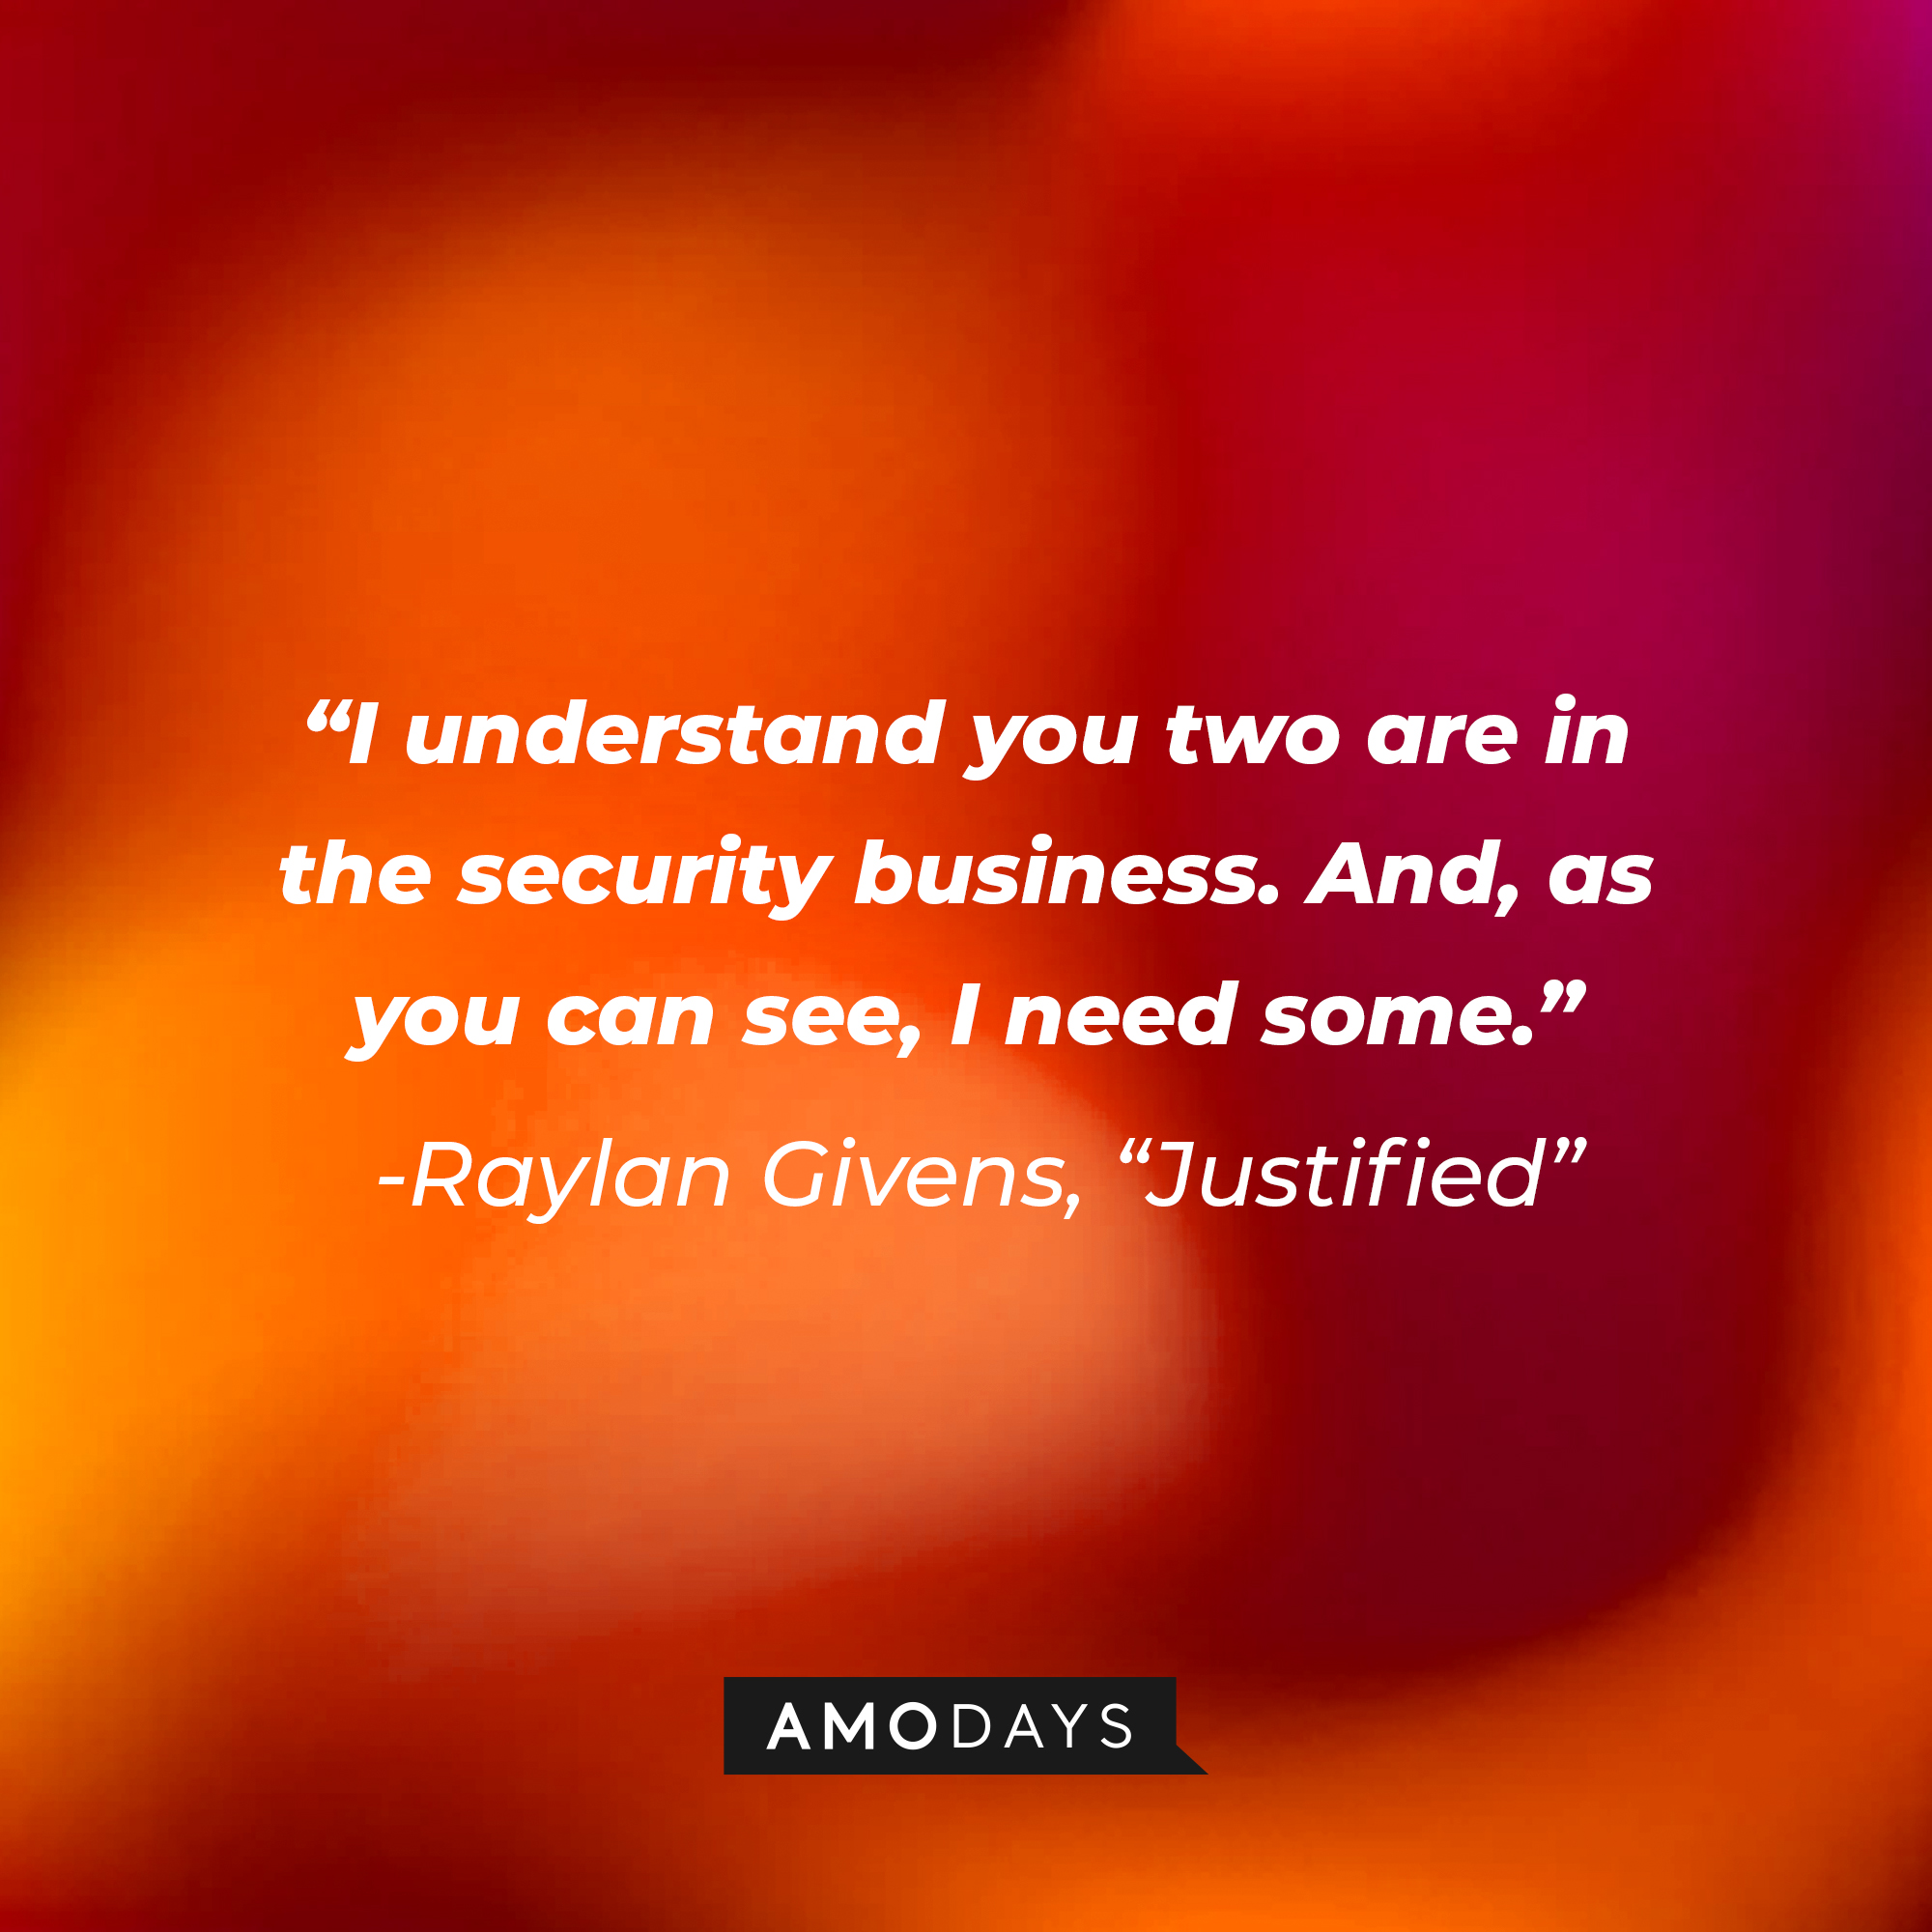 Raylan Givens’ quote from “Justified”: “I understand you two are in the security business. And, as you can see, I need some.” | Source: AmoDays